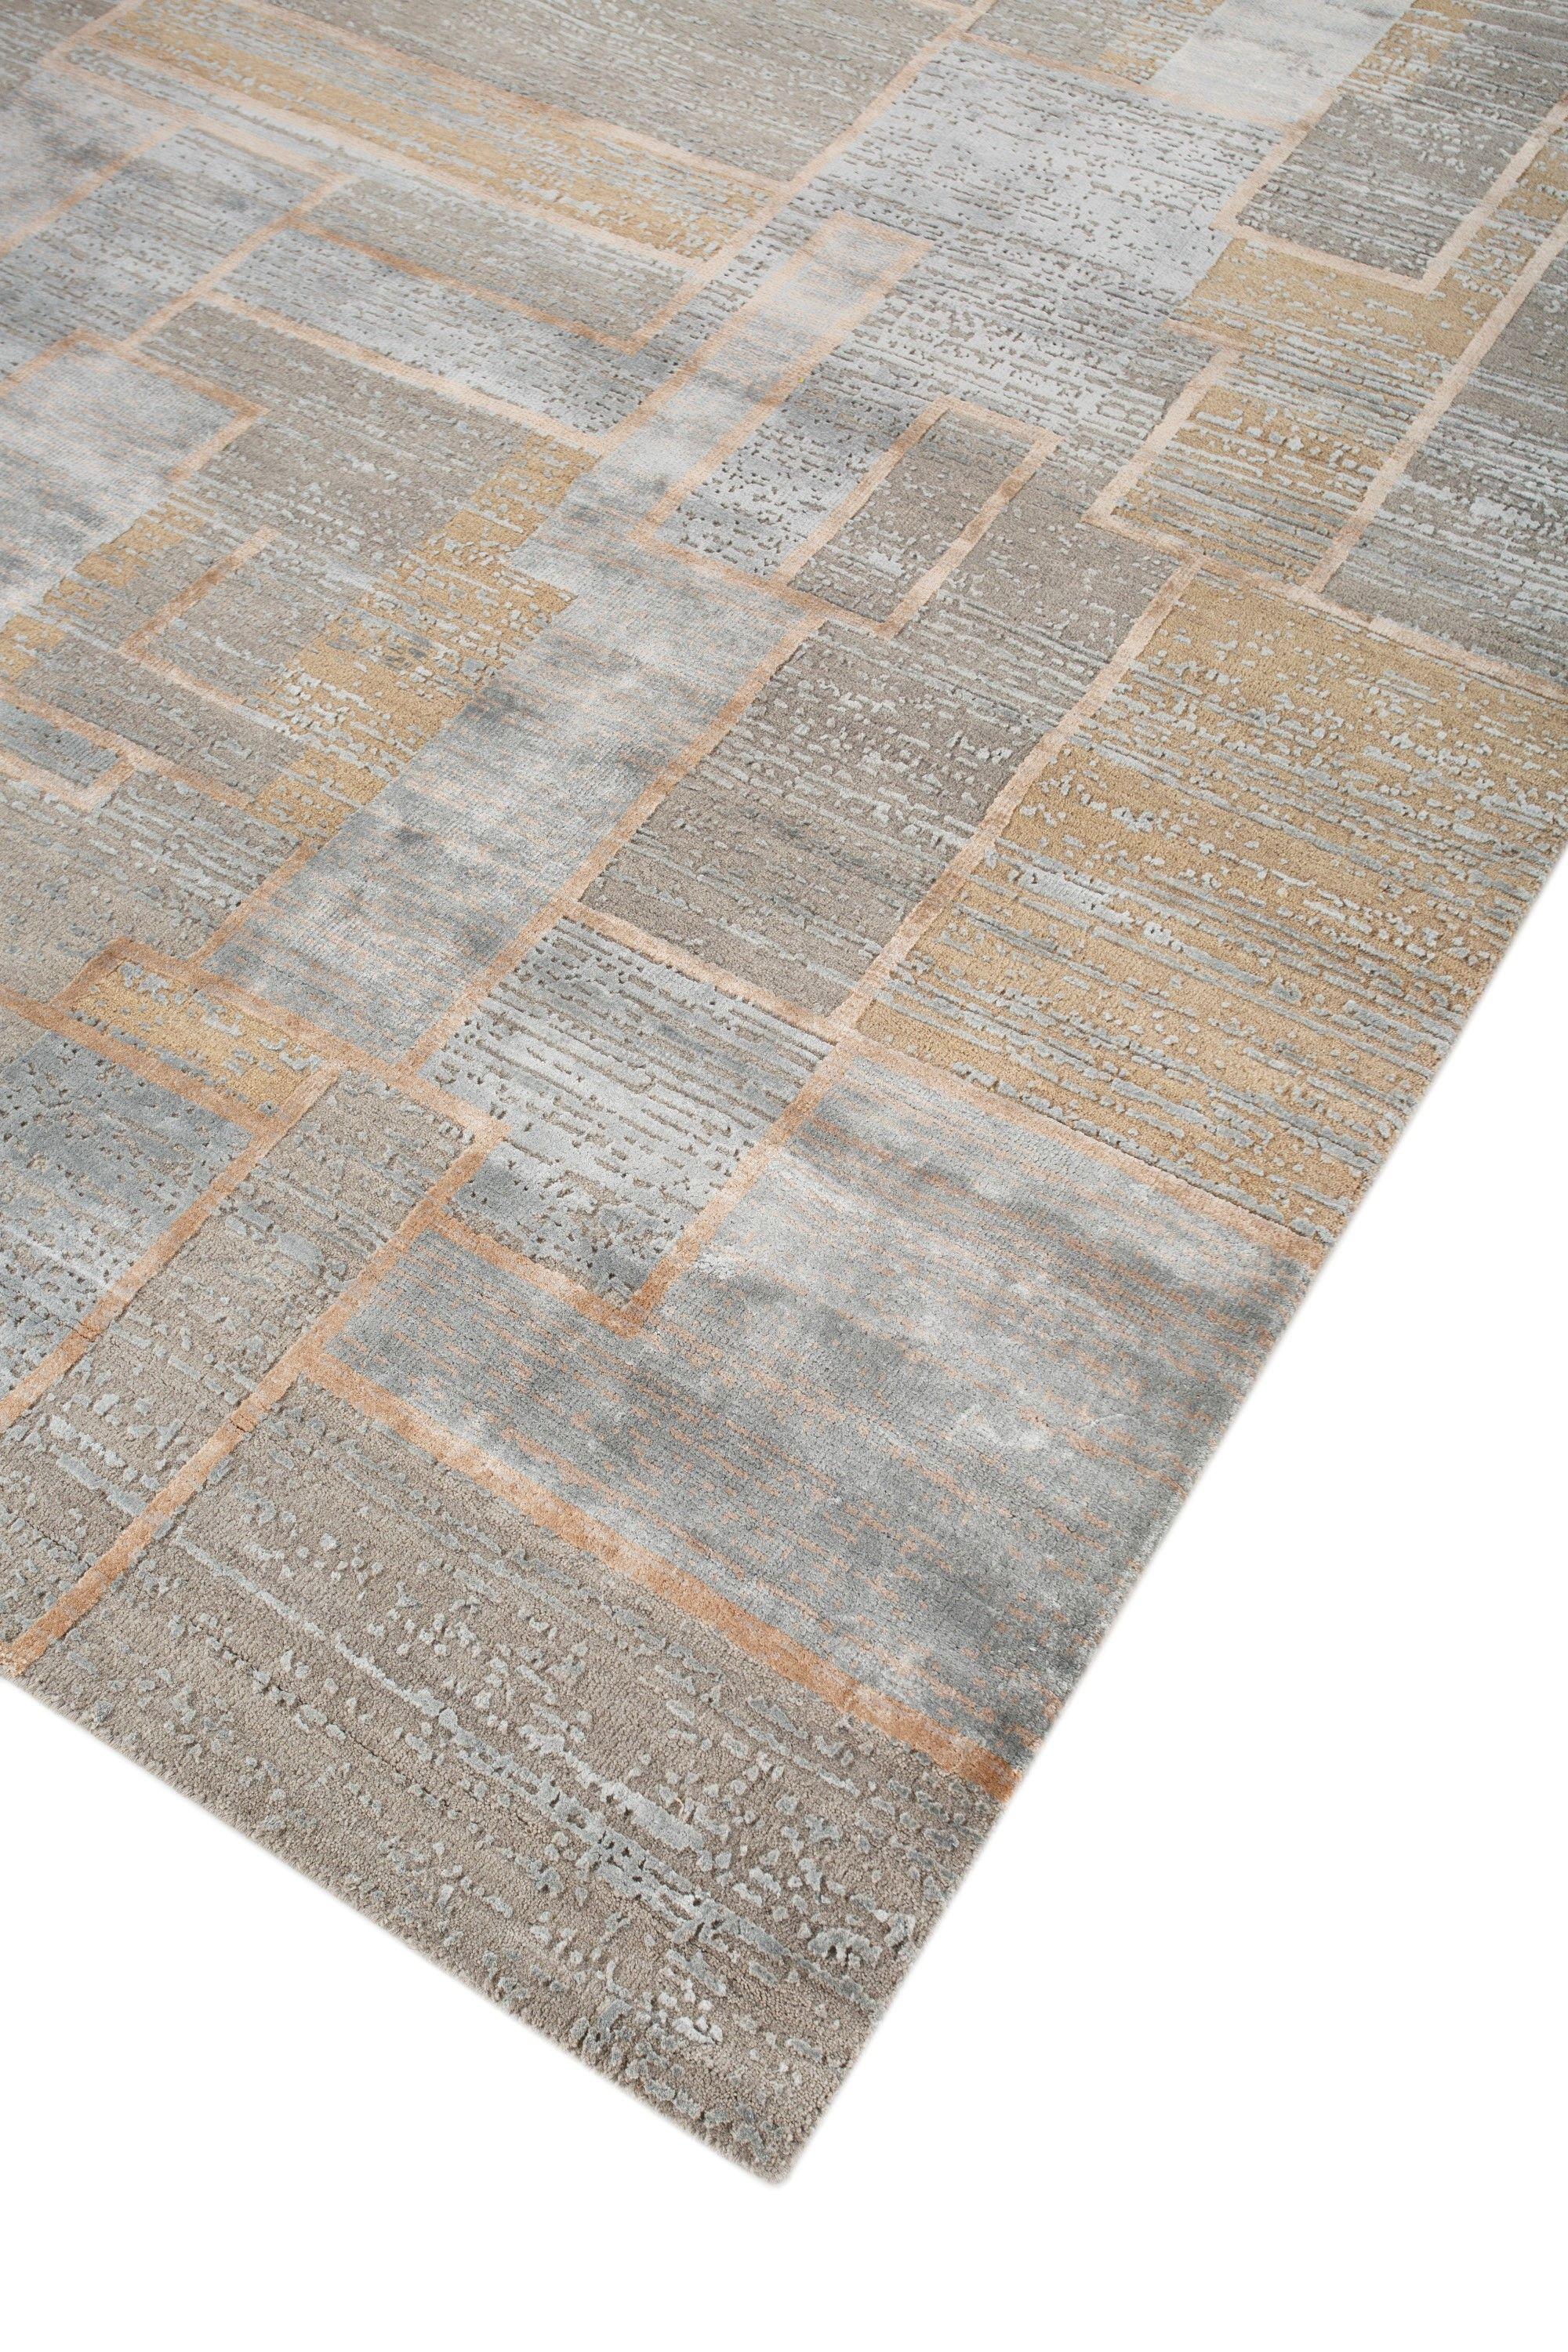 Modern Serendipitious Fusion Ashwood & Iced Slate 200X300 cm Handknotted Rug For Sale